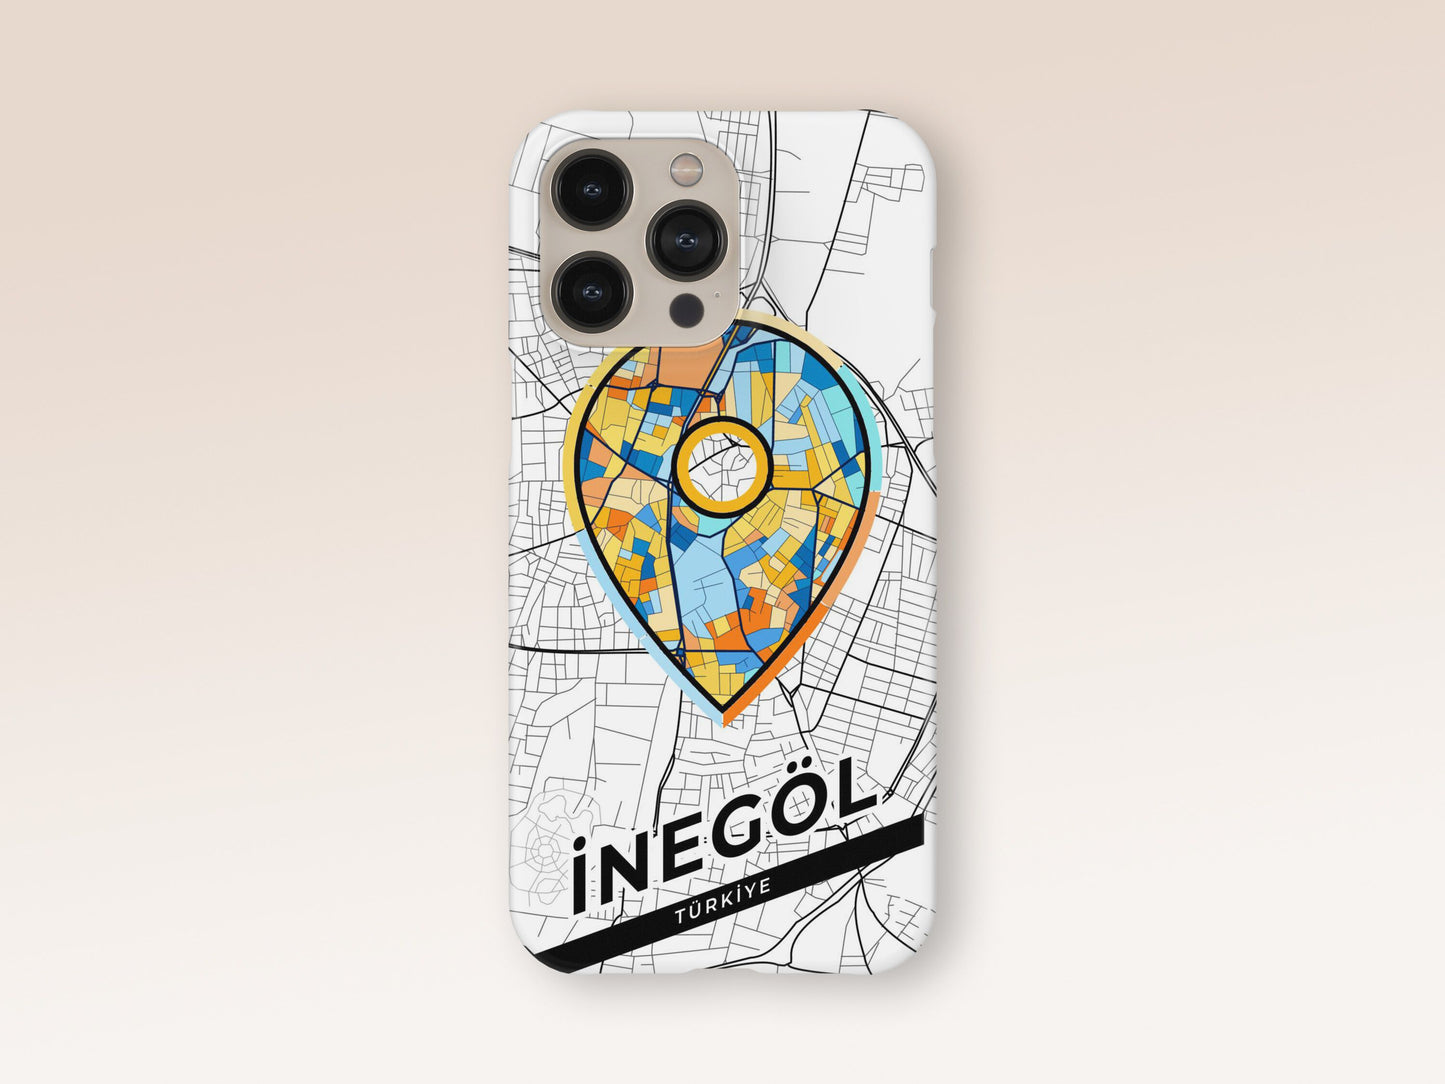 İnegöl Turkey slim phone case with colorful icon. Birthday, wedding or housewarming gift. Couple match cases. 1